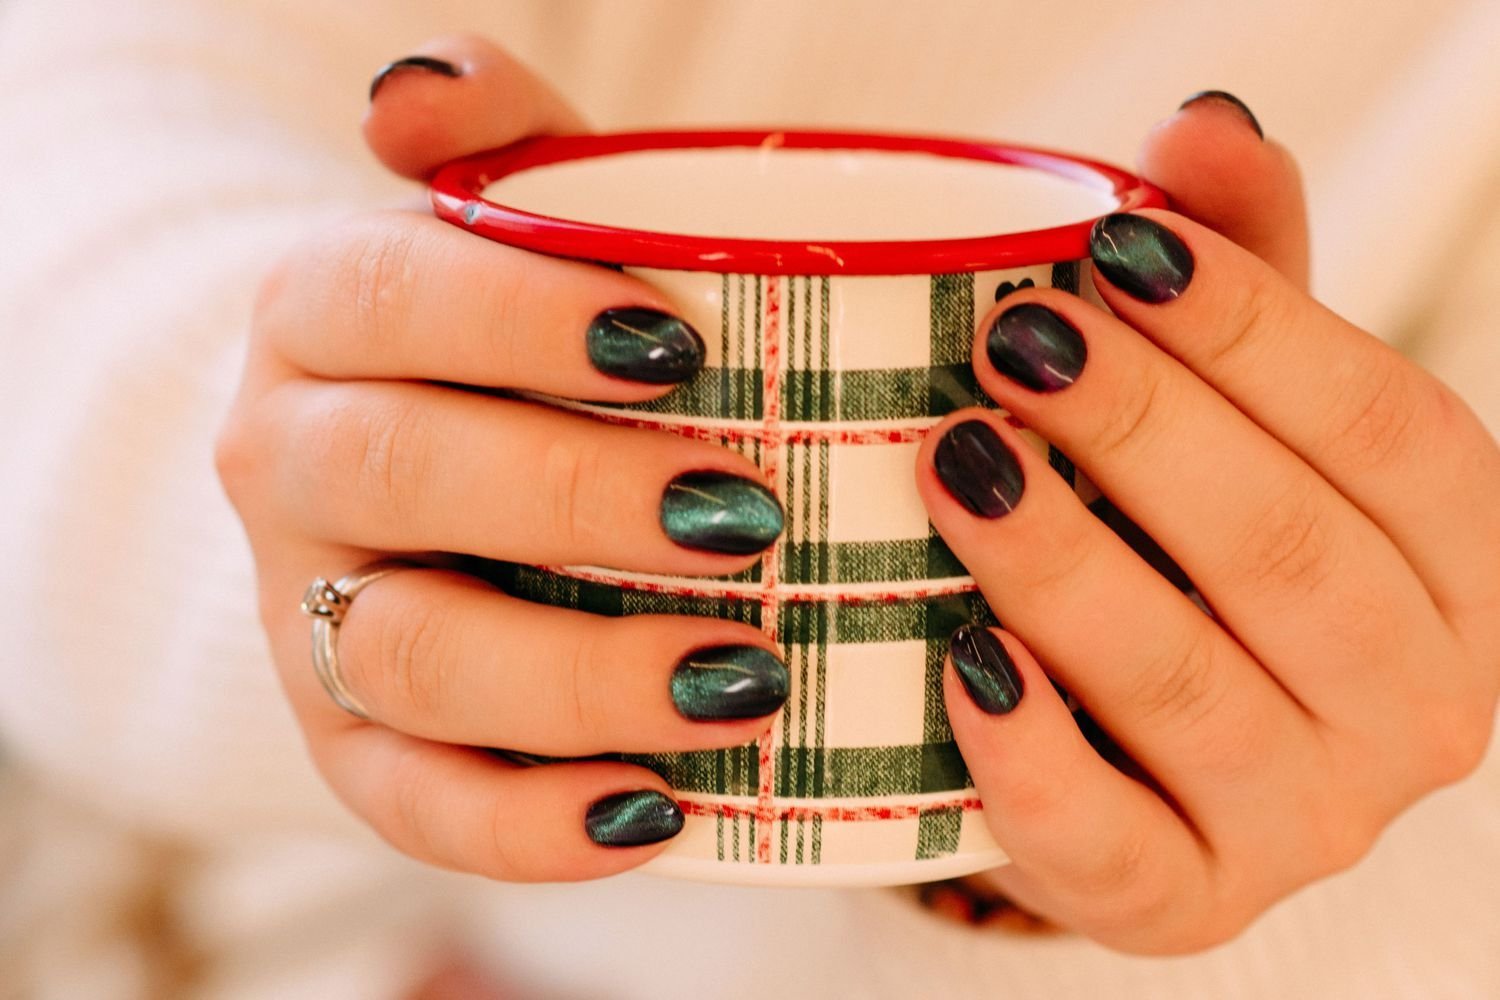 10 Nail Polish Colors to Get You Through Winter